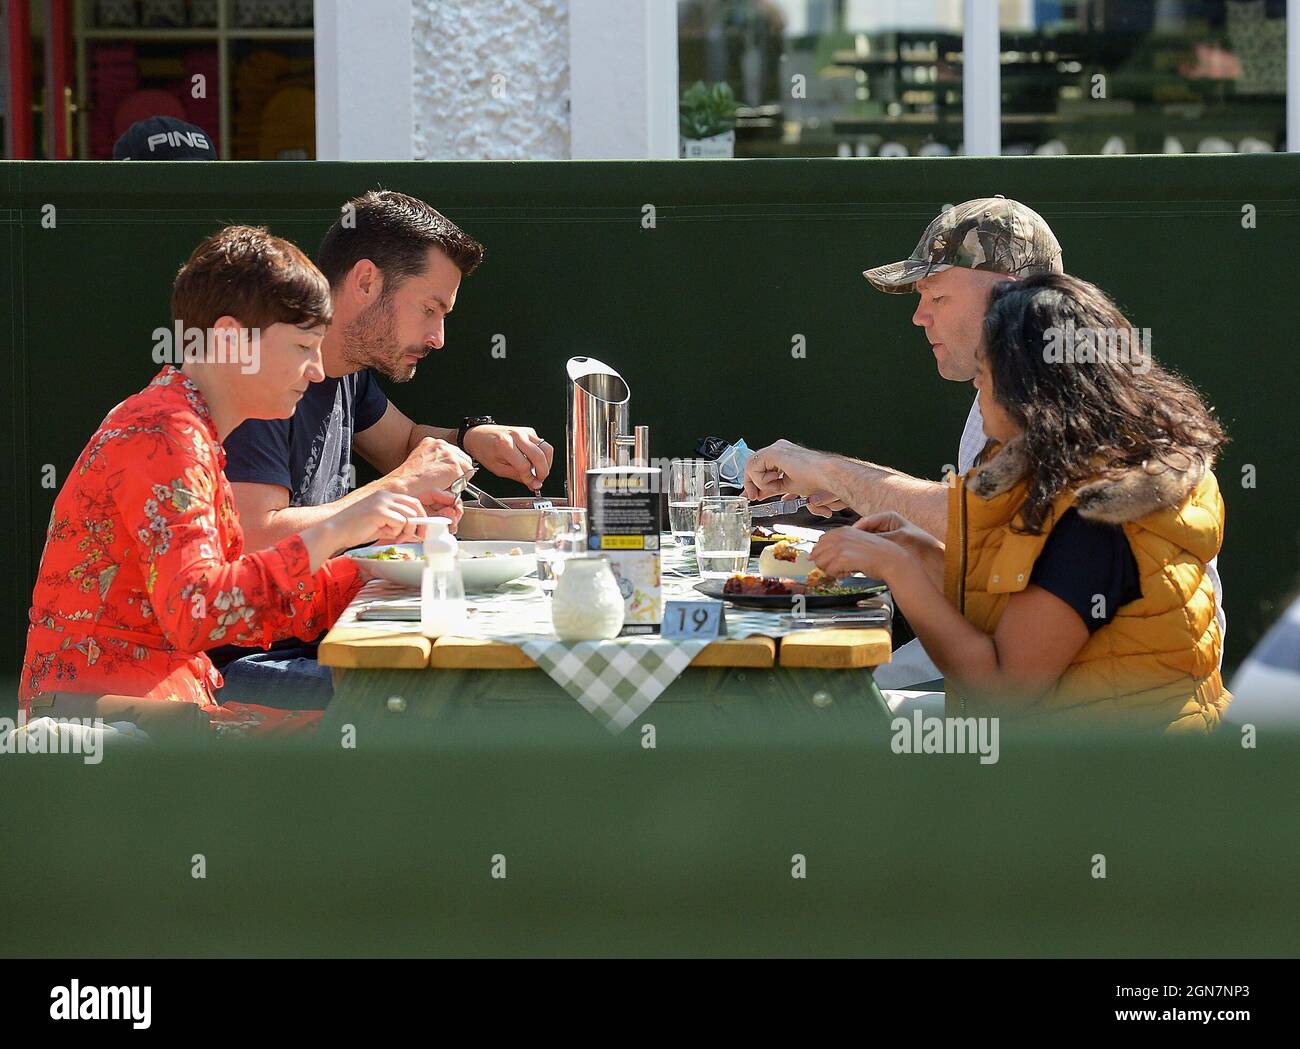 Young adults dining outdoors in the Craft village in Derry, Northern Ireland 2021. ©George Sweeney / Alamy Stock Photo Stock Photo